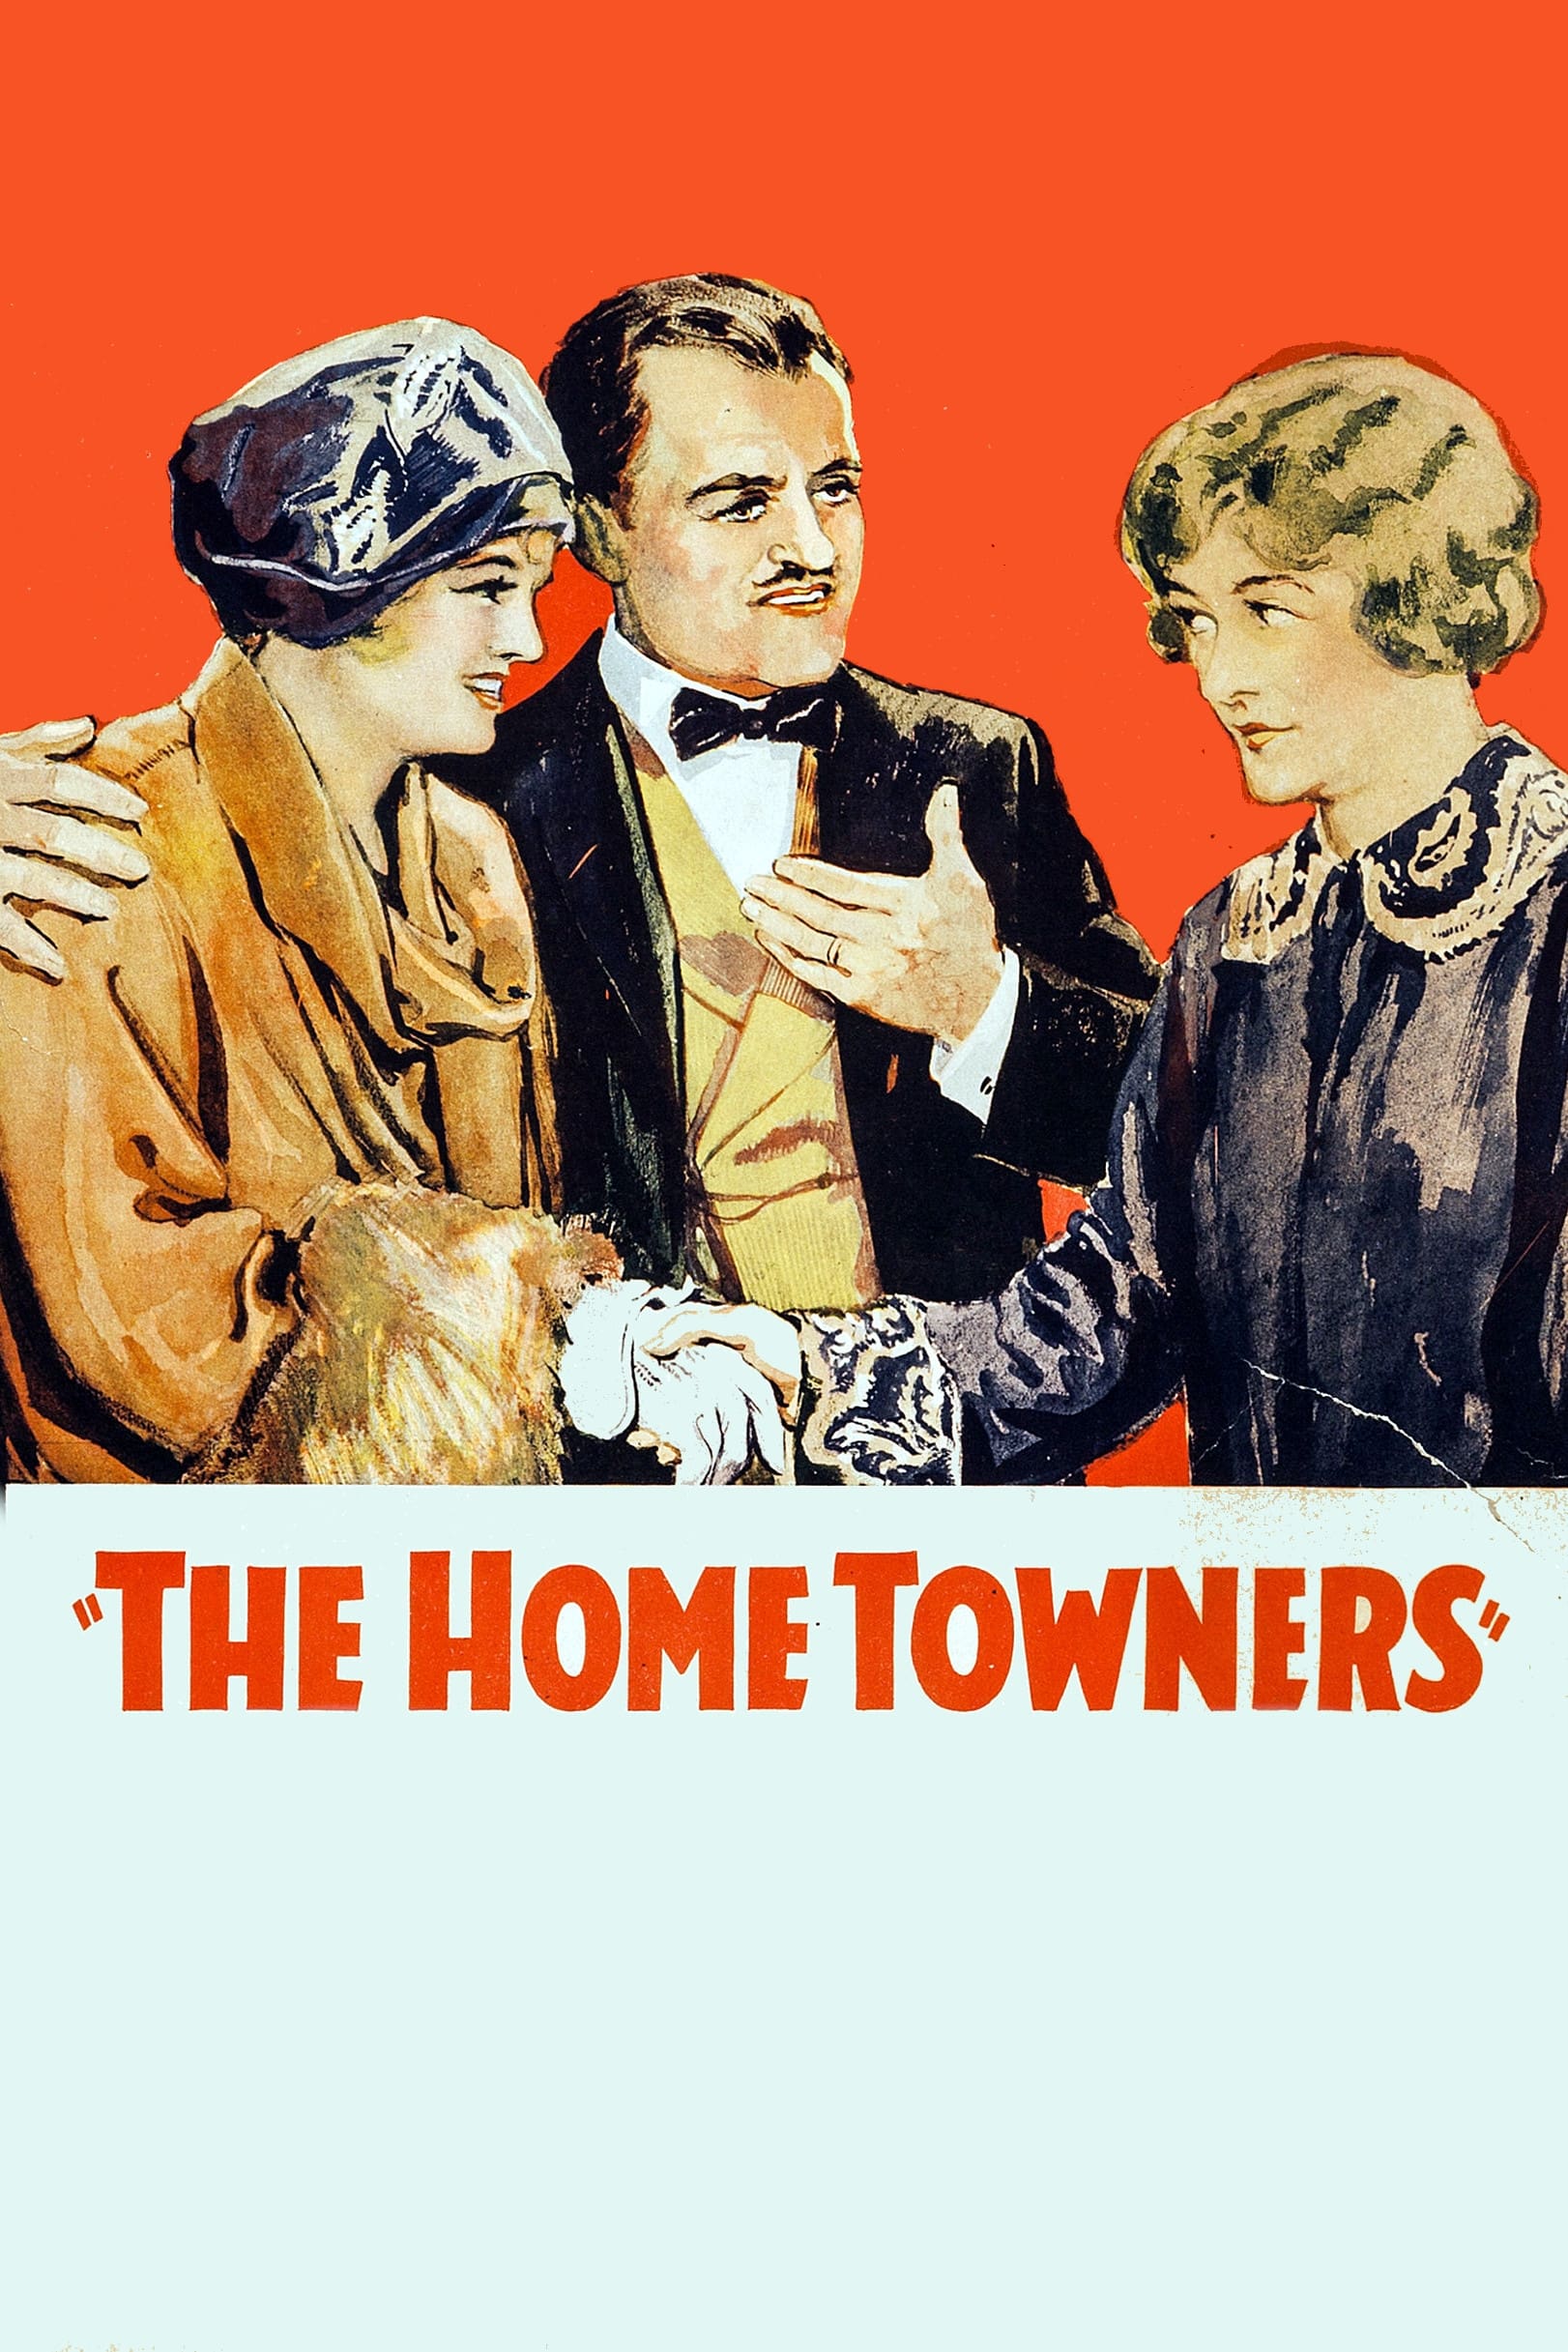 The Home Towners